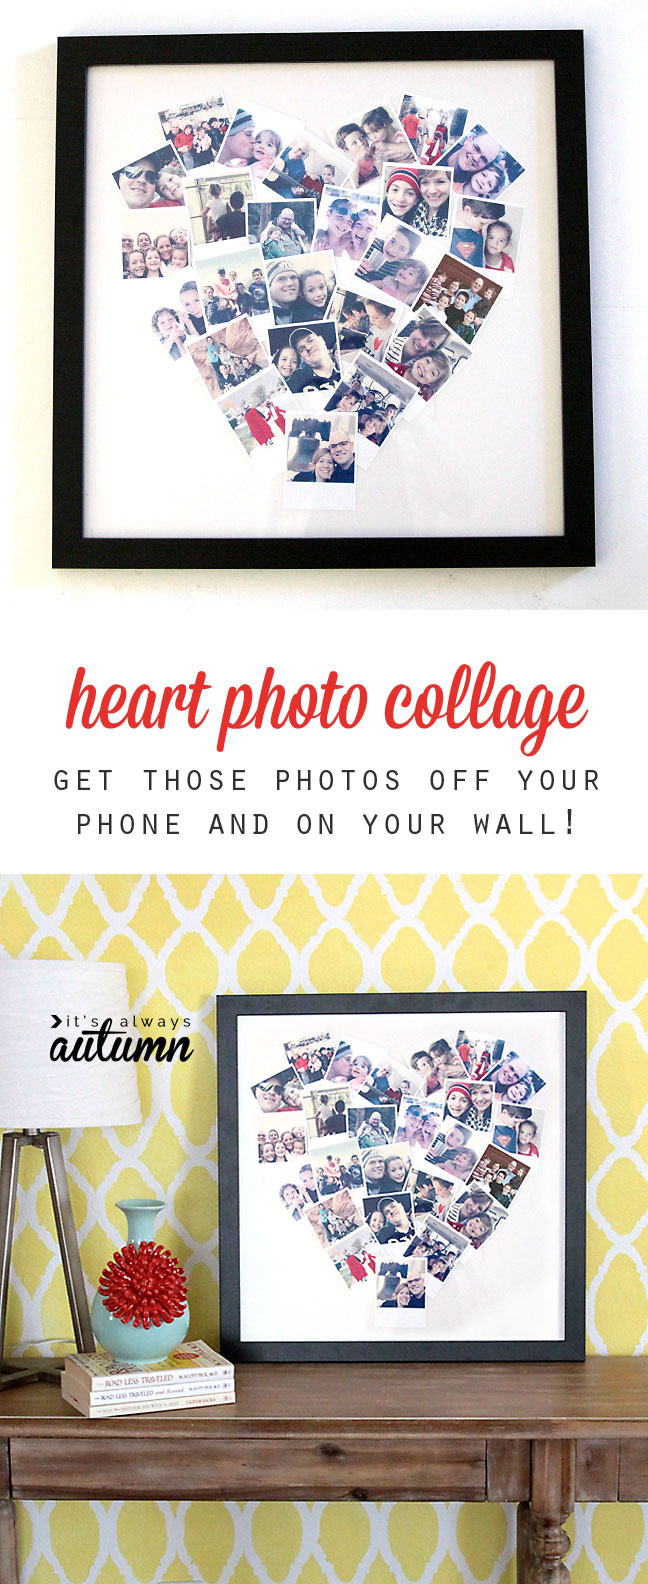 get your photos off your phone and on you wall with this cute DIY heart photo collage. great handmade gift idea!